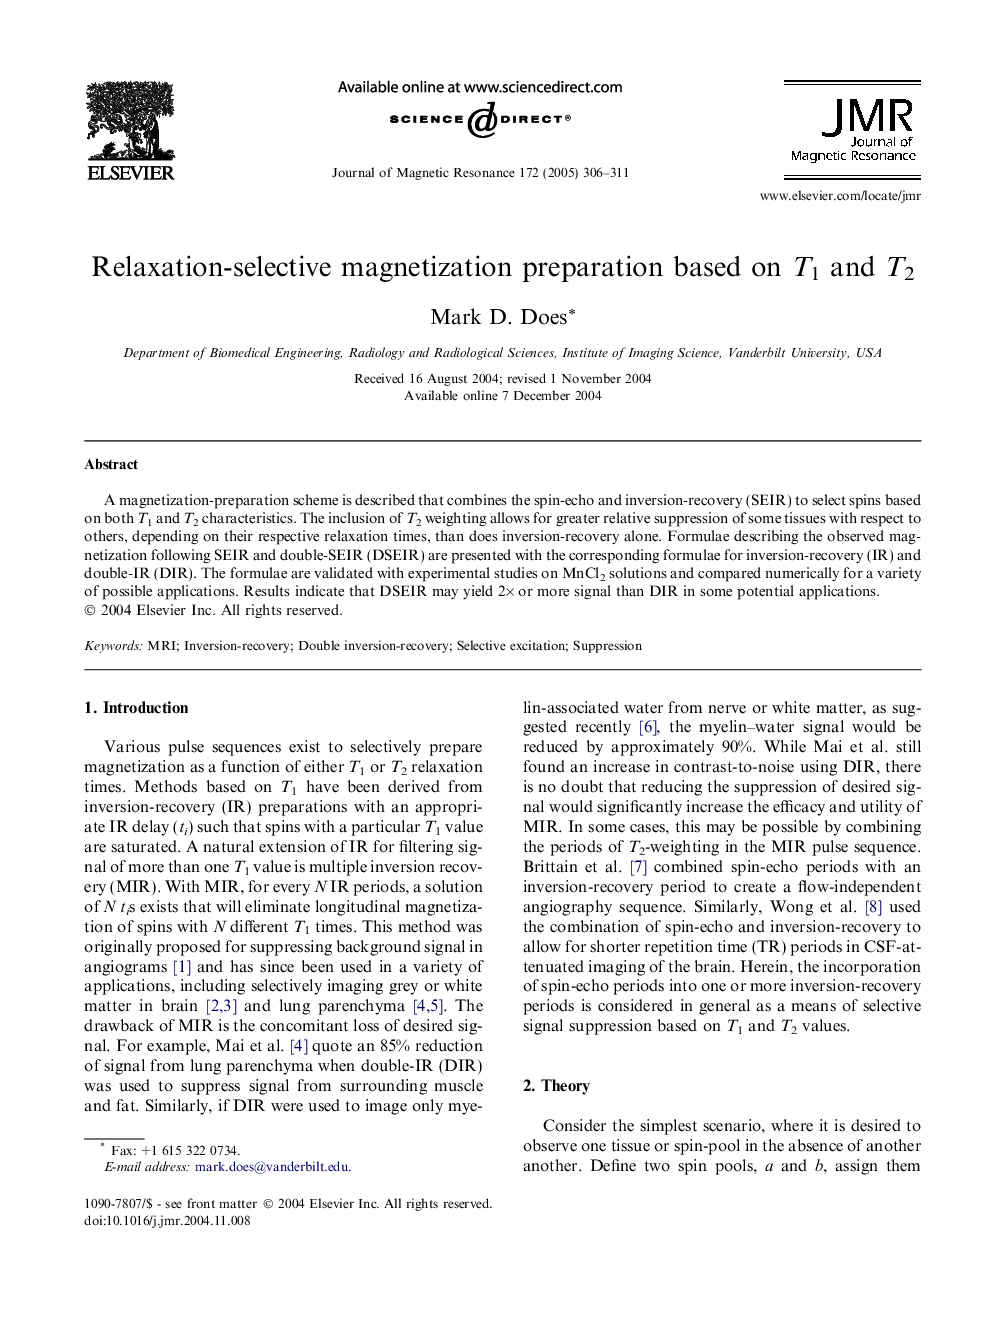 Relaxation-selective magnetization preparation based on T1 and T2